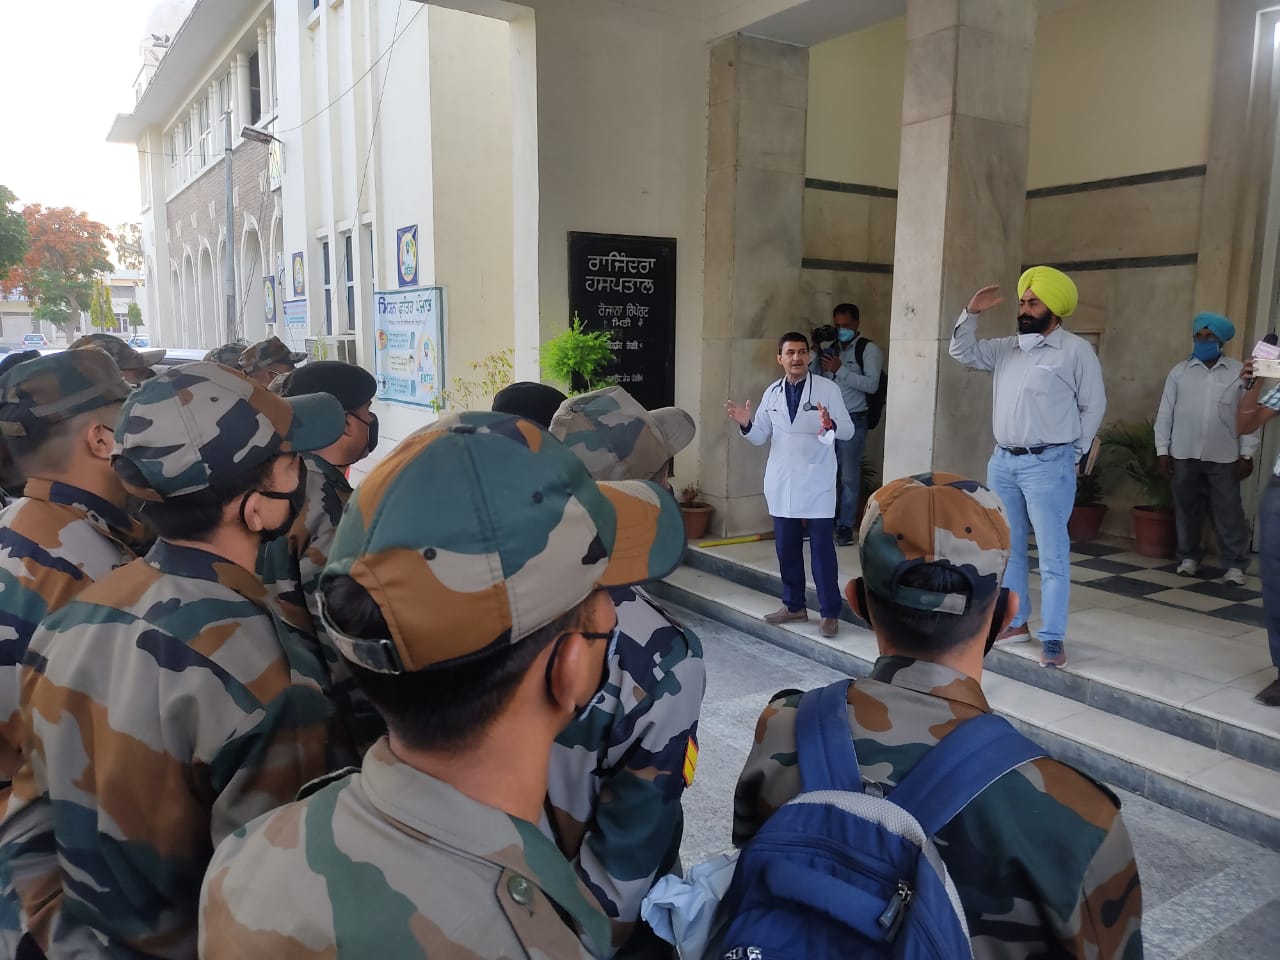 Patiala district administration called in Army; to assist paramedic staff caring Covid patients